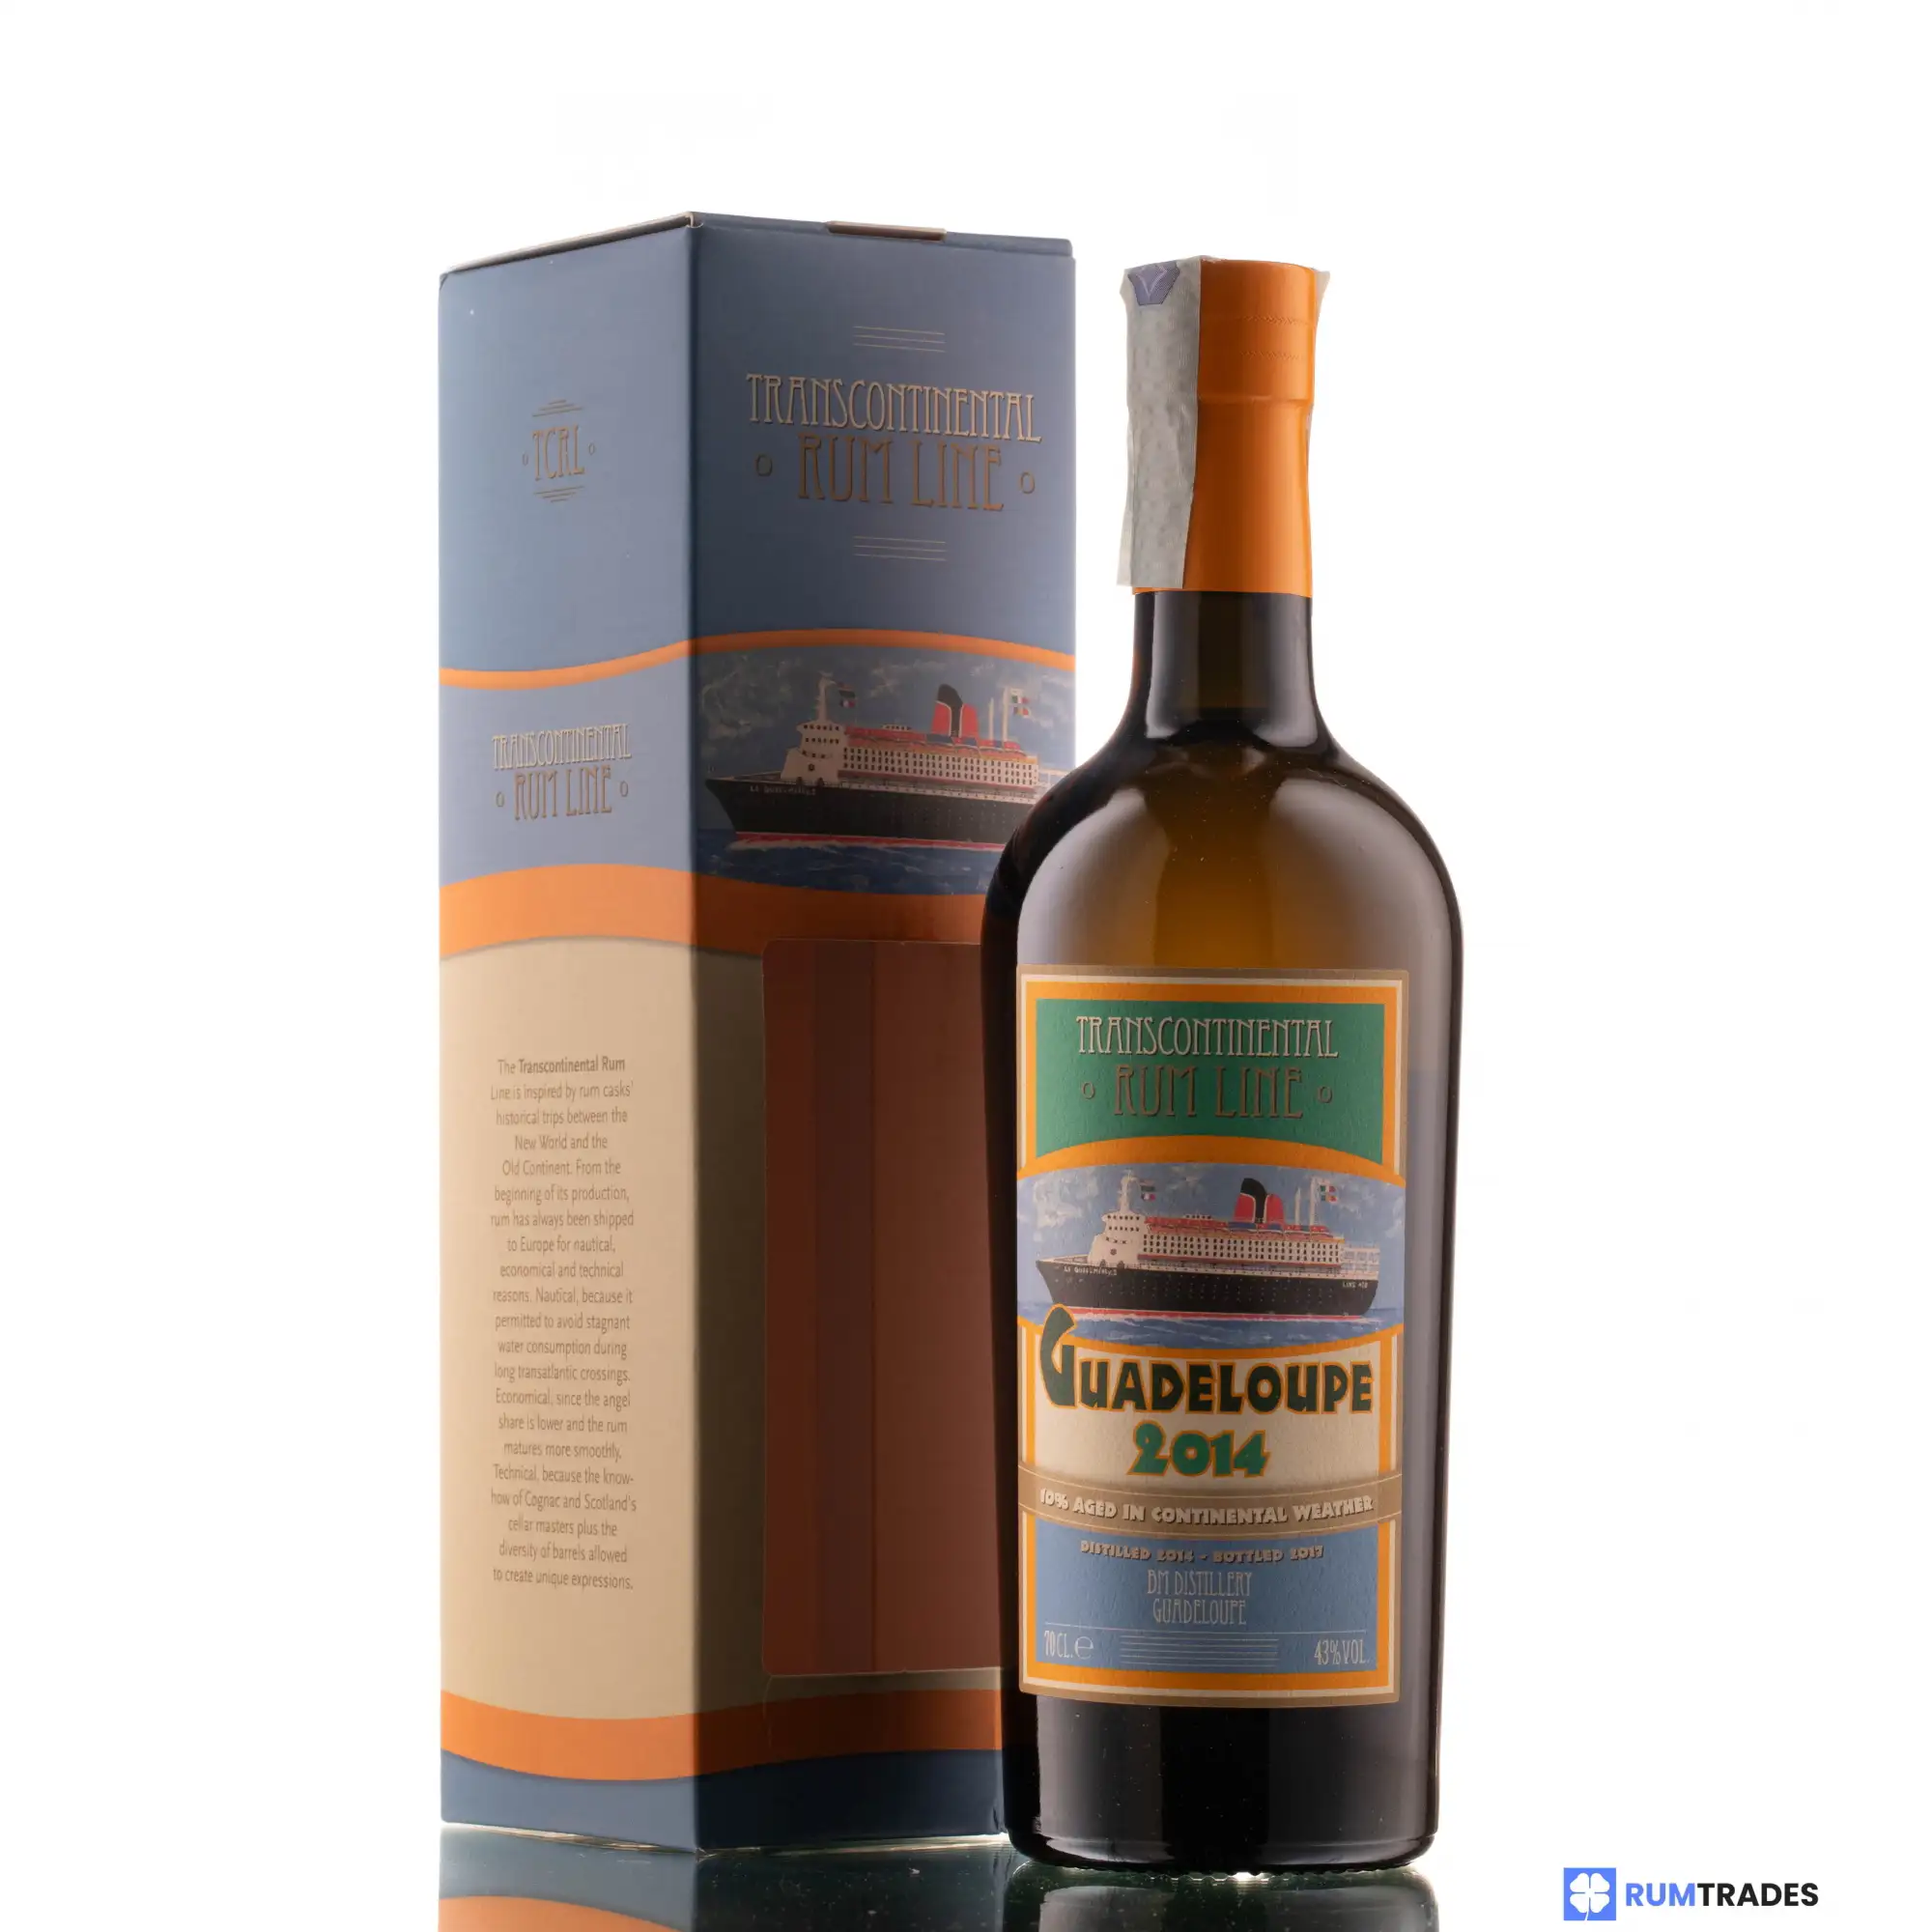 Image of the front of the bottle of the rum Guadeloupe